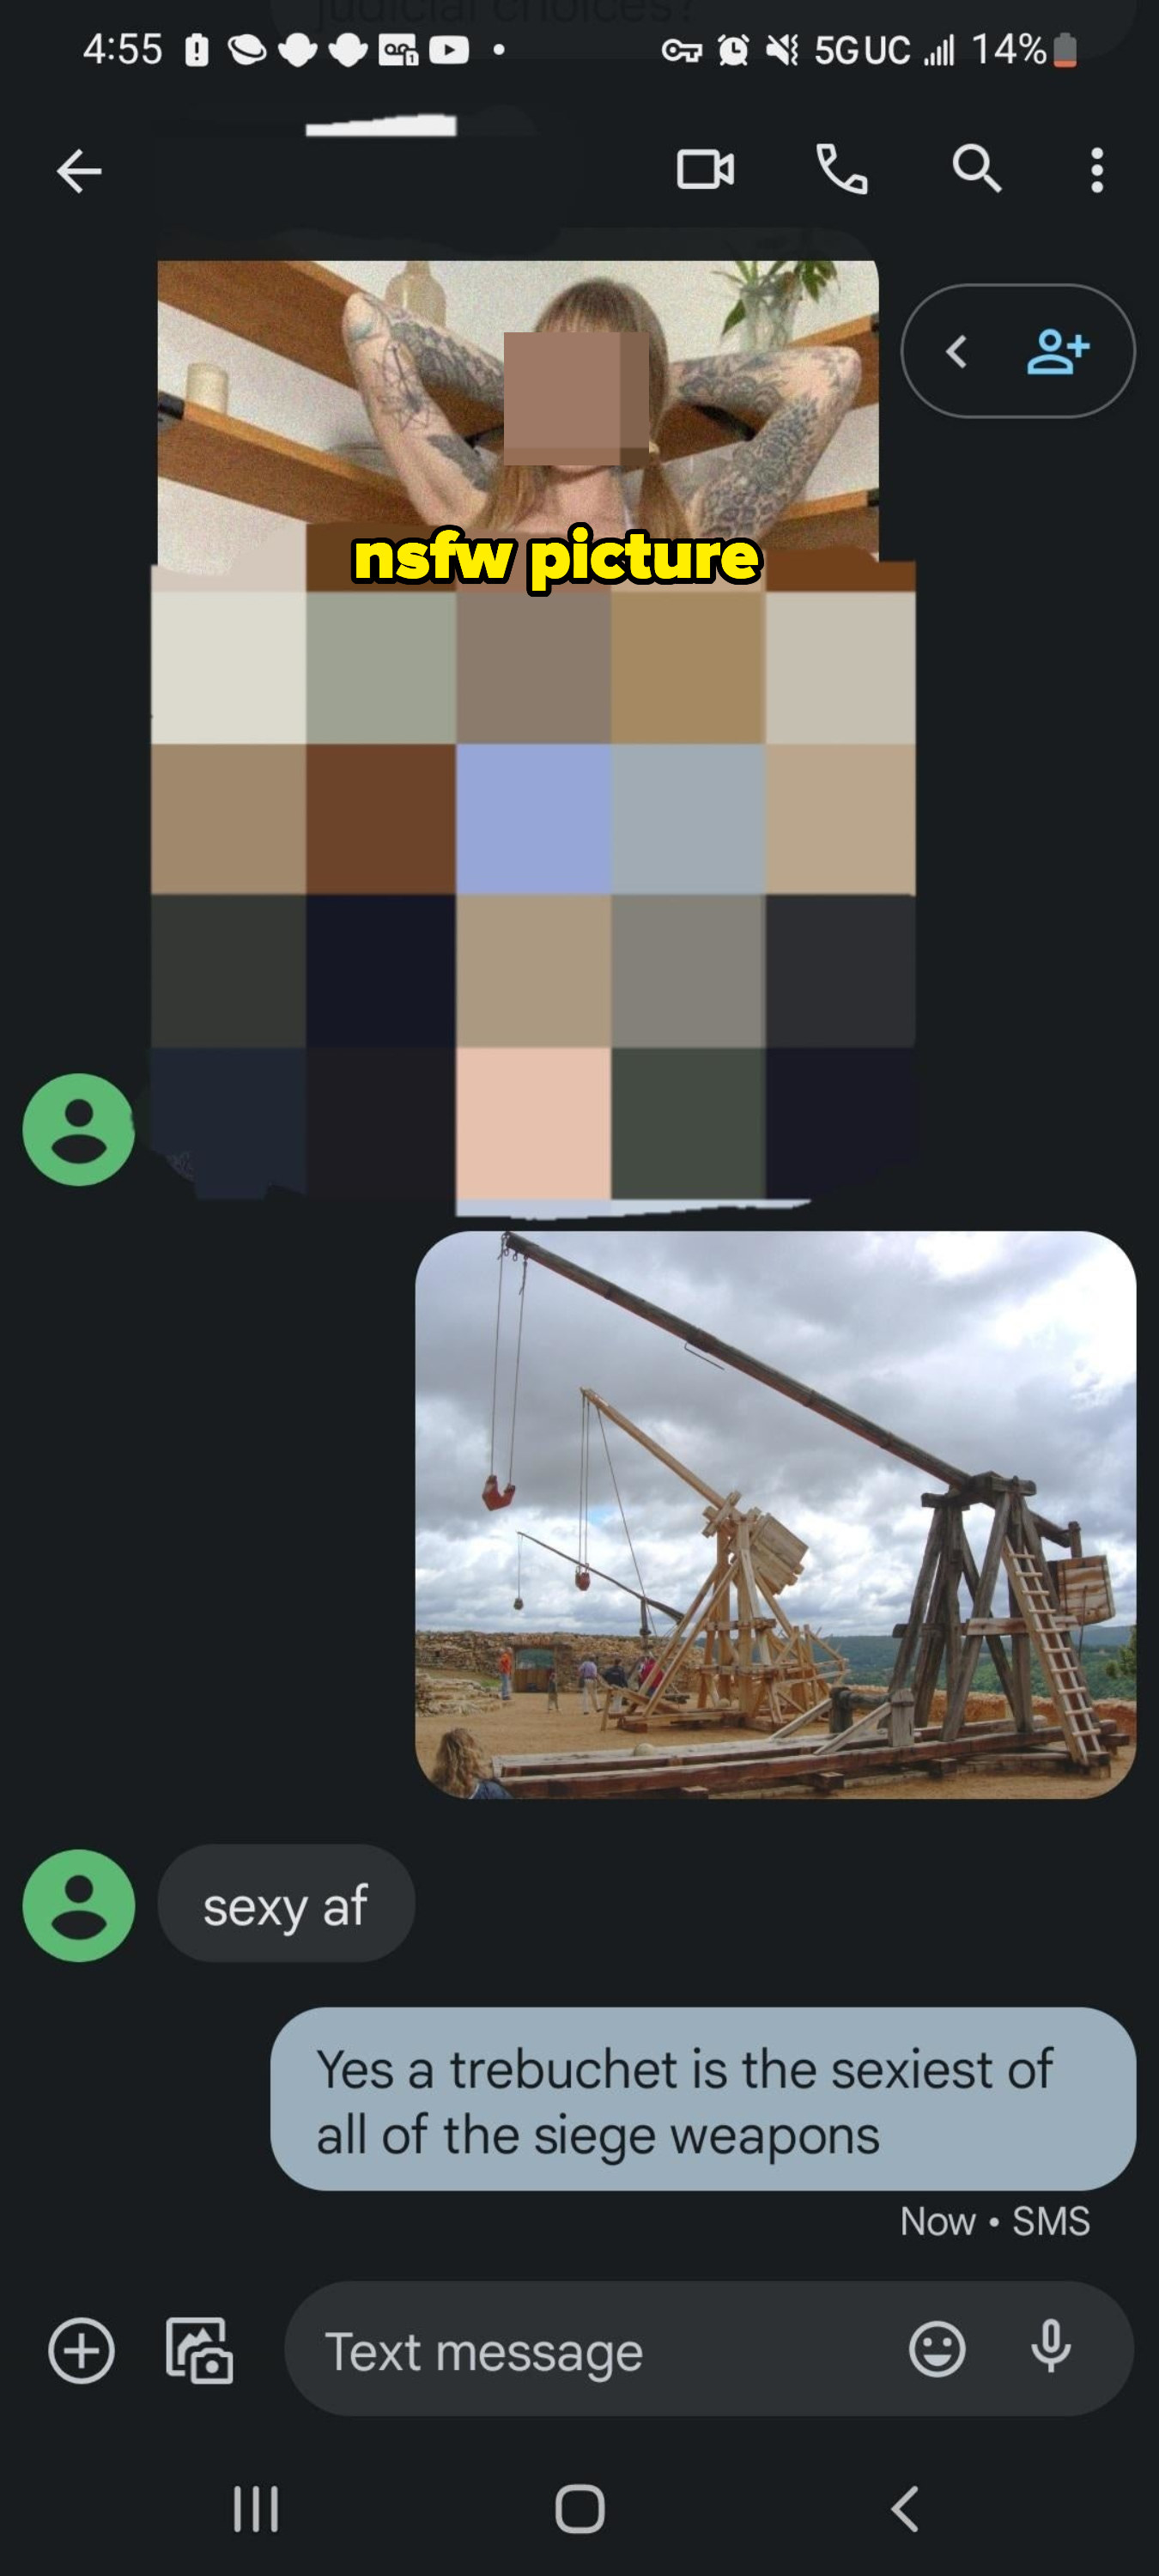 someone sends a nsfw pic and they send a pic of a trebuchet back